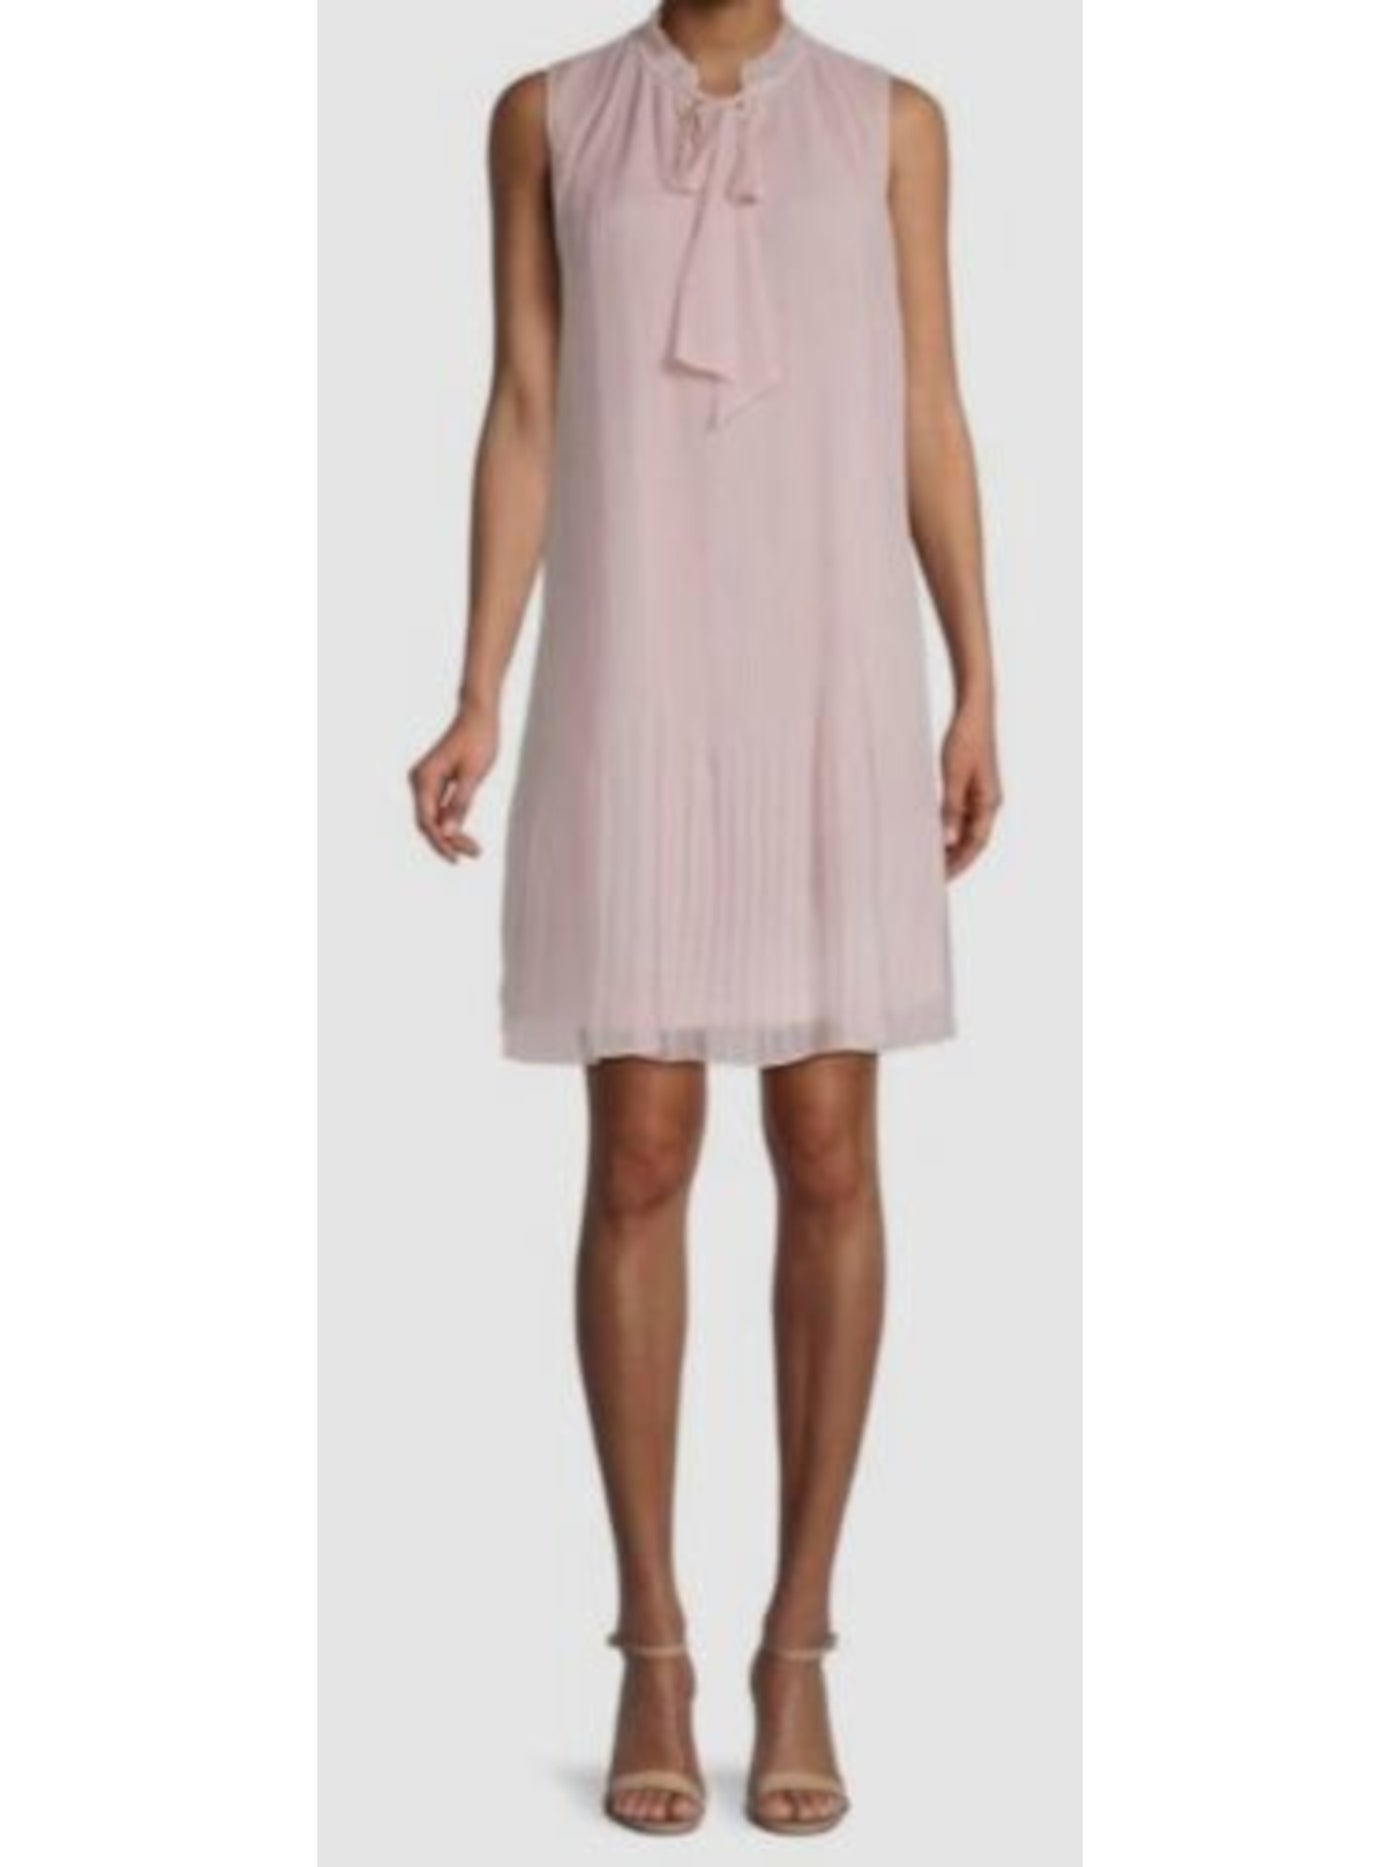 DKNY Womens Pink Pleated Sheer Lined Sleeveless Tie Neck Above The Knee Wear To Work Shift Dress 12